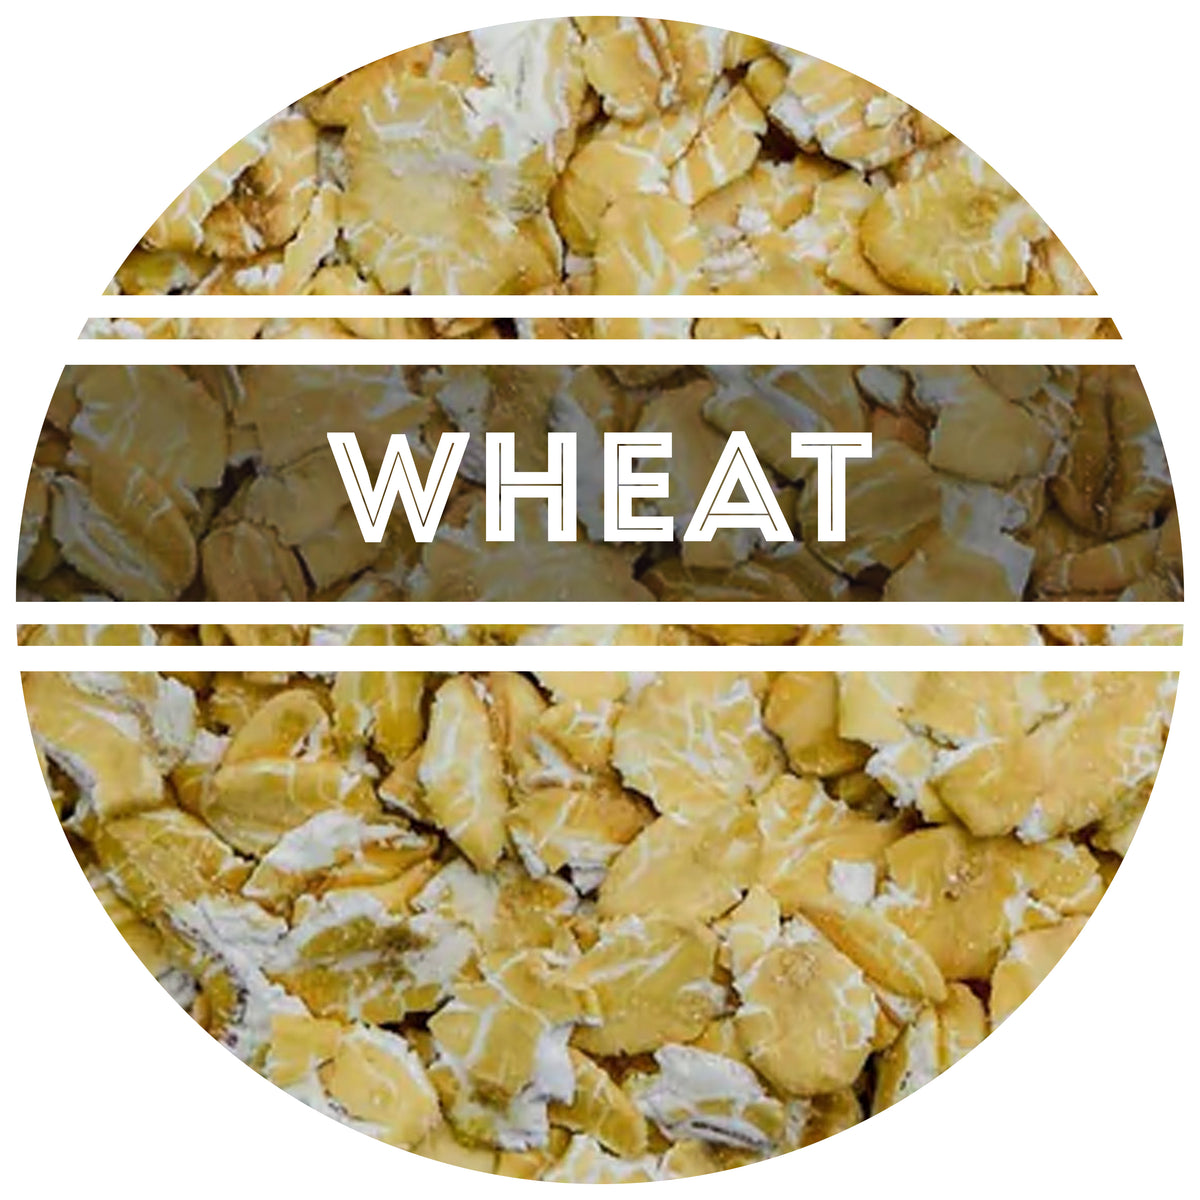 Flaked, Un-Malted Wheat